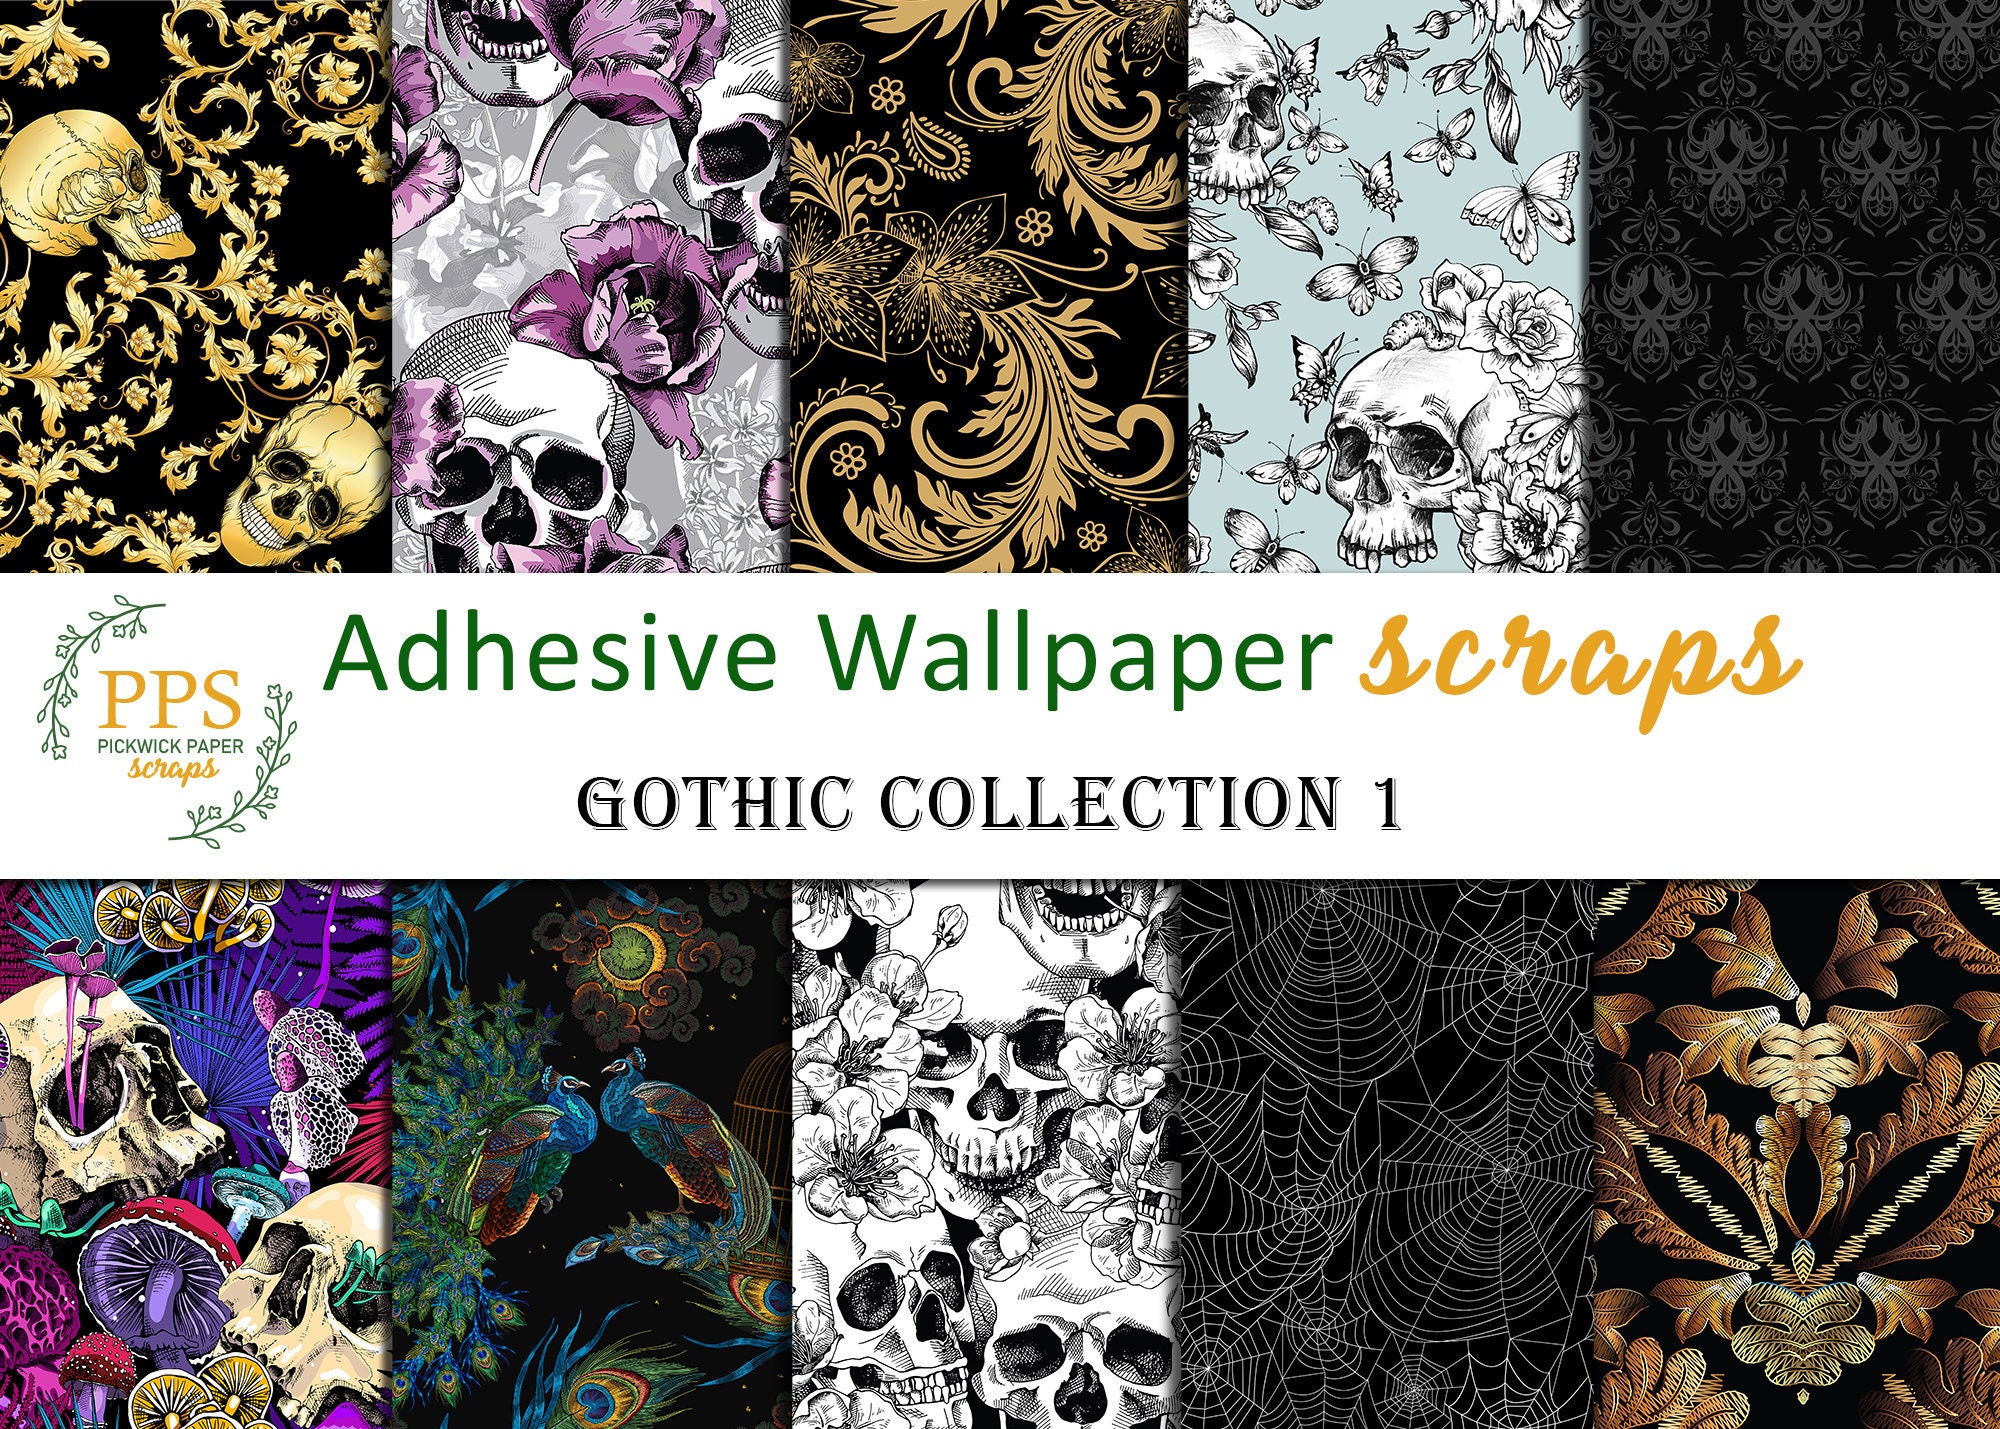 Seamless Black and White Gothic Digital Paper, Skull Damask Halloween Scrapbook  Paper, Printable Distressed Grunge Texture, Goth Backgrounds 